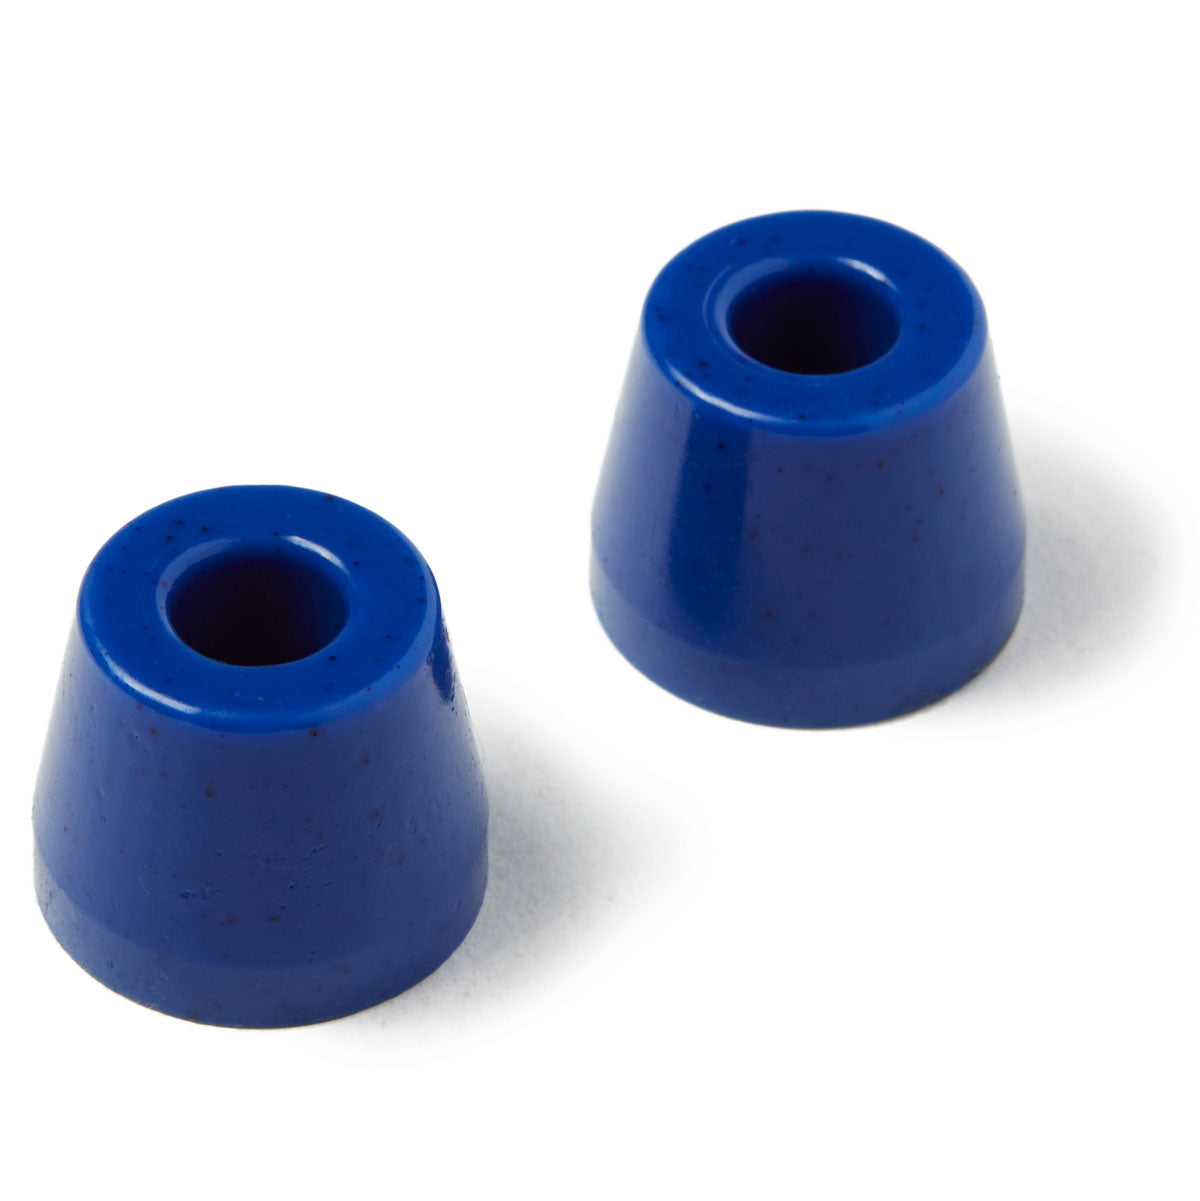 RipTide Tall Cone Bushings - APS 92.5a image 1